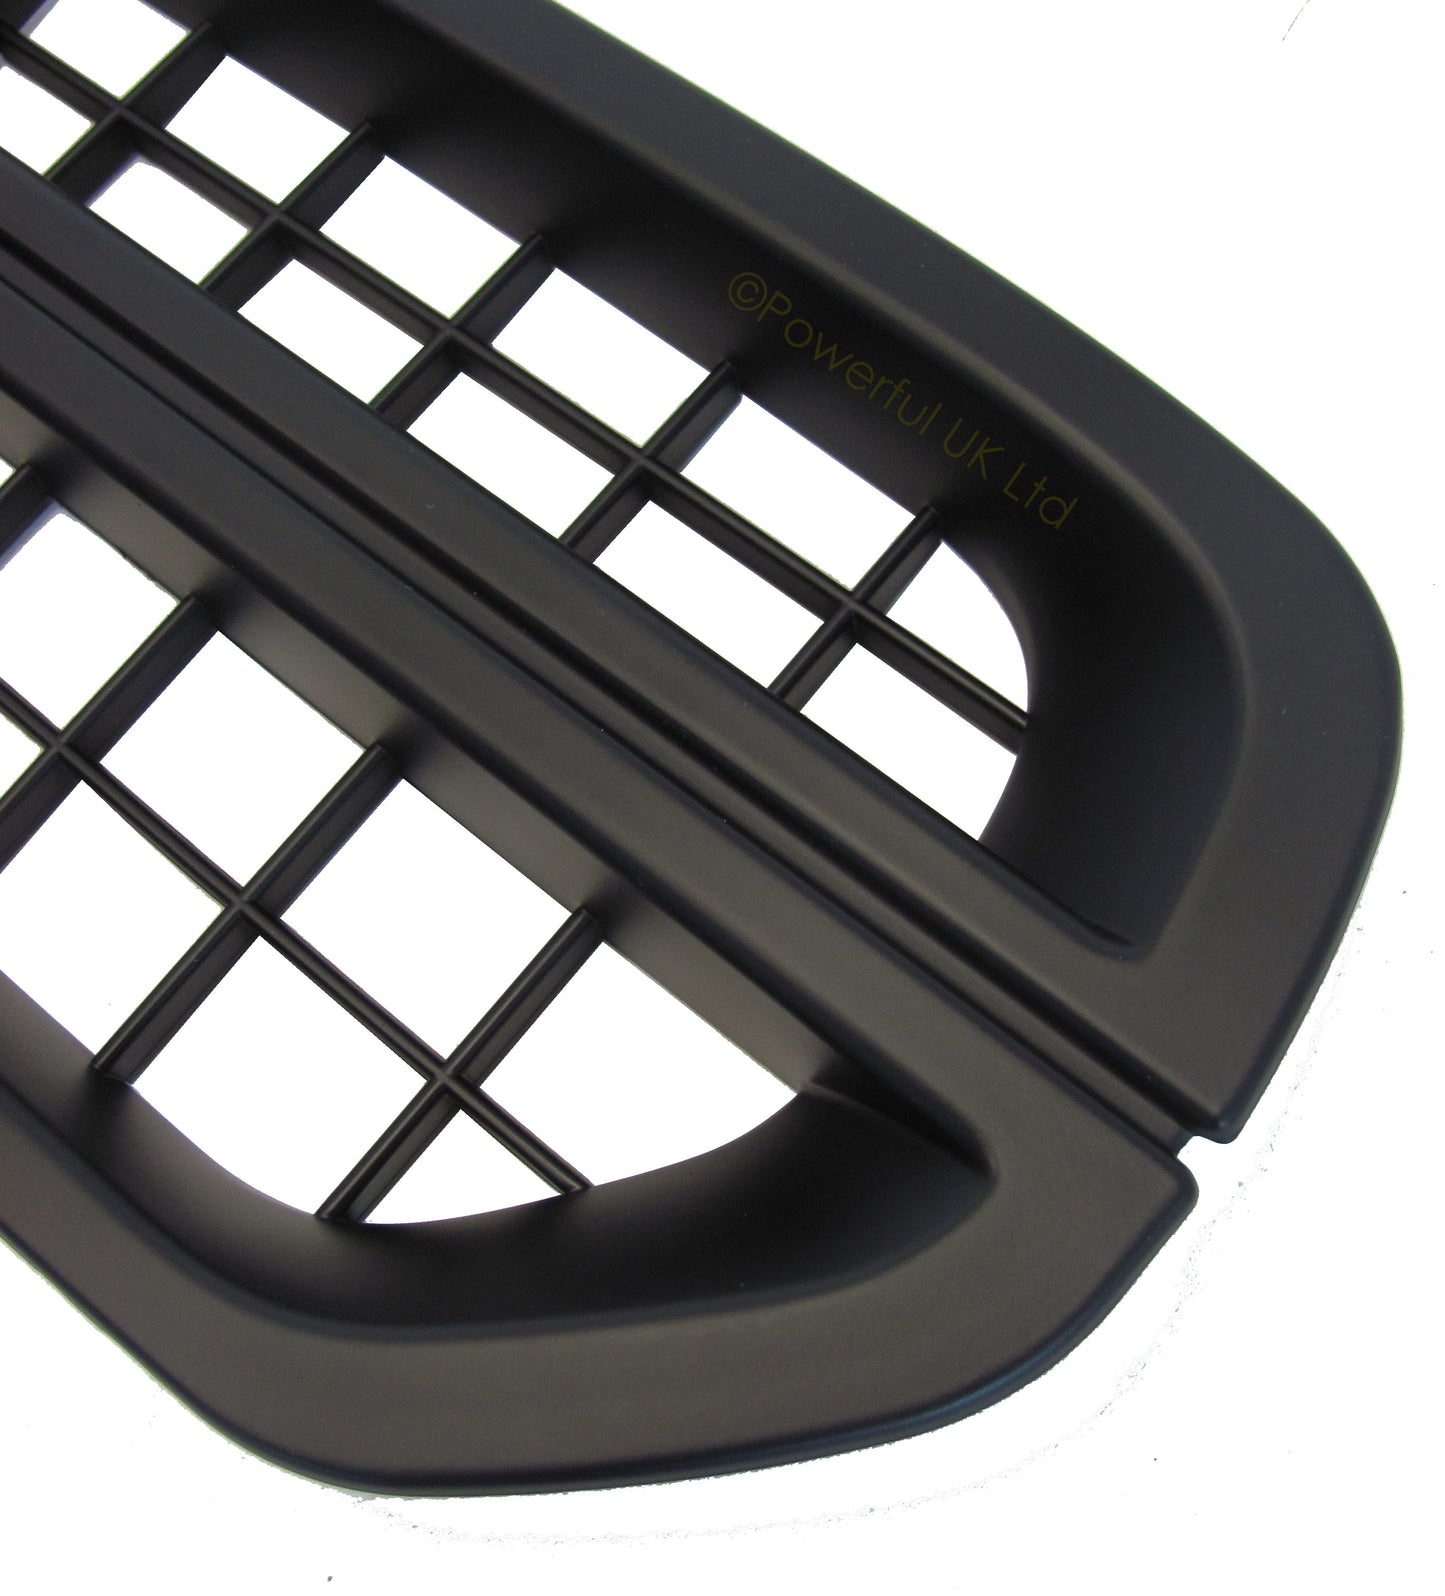 Land Rover Discovery 3 Side Vent Assembly - Matt Black